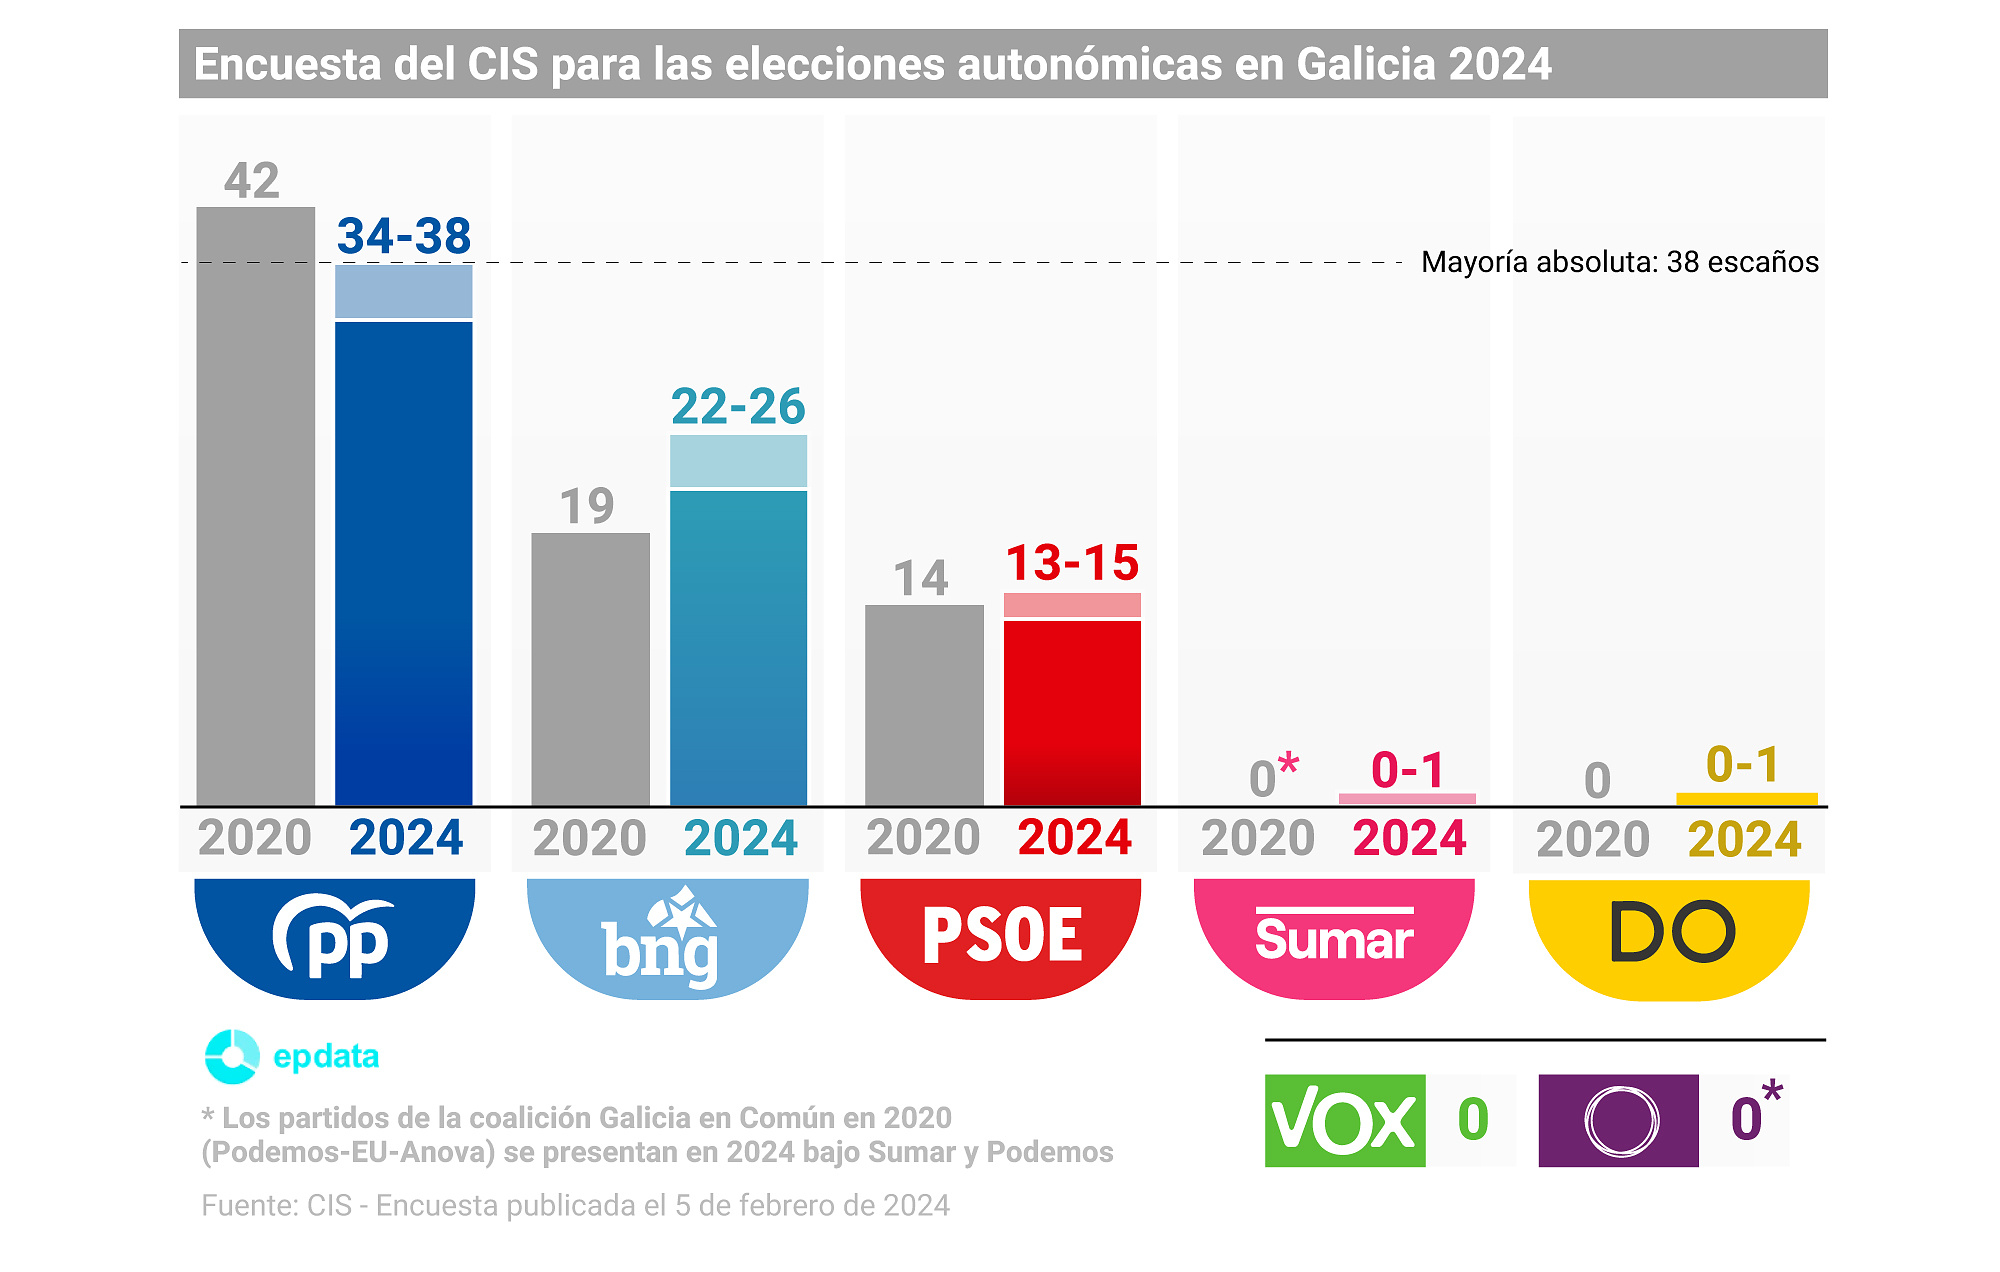 A new CIS survey indicates that the PP would remain at 34-38 seats and could lose the absolute majority in Galicia